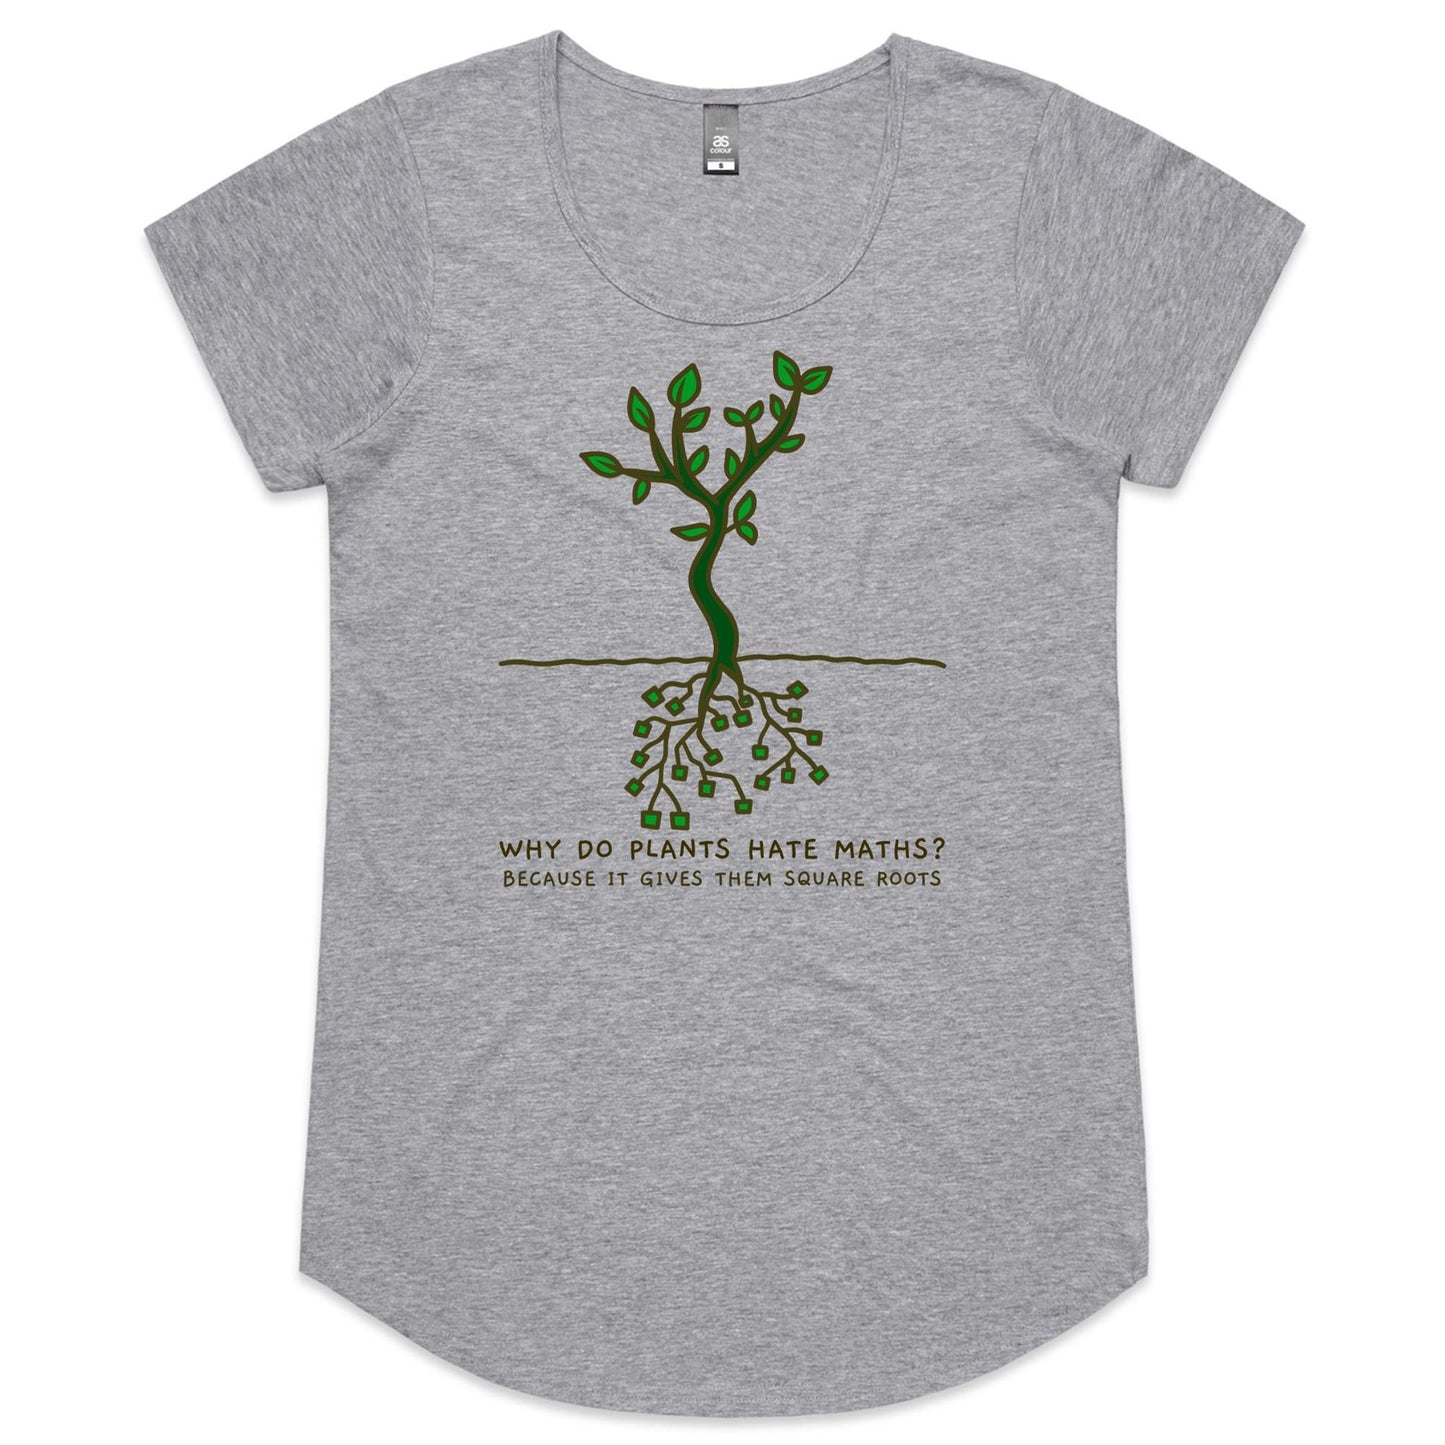 Square Roots - Womens Scoop Neck T-Shirt Grey Marle Womens Scoop Neck T-shirt Maths Plants Science